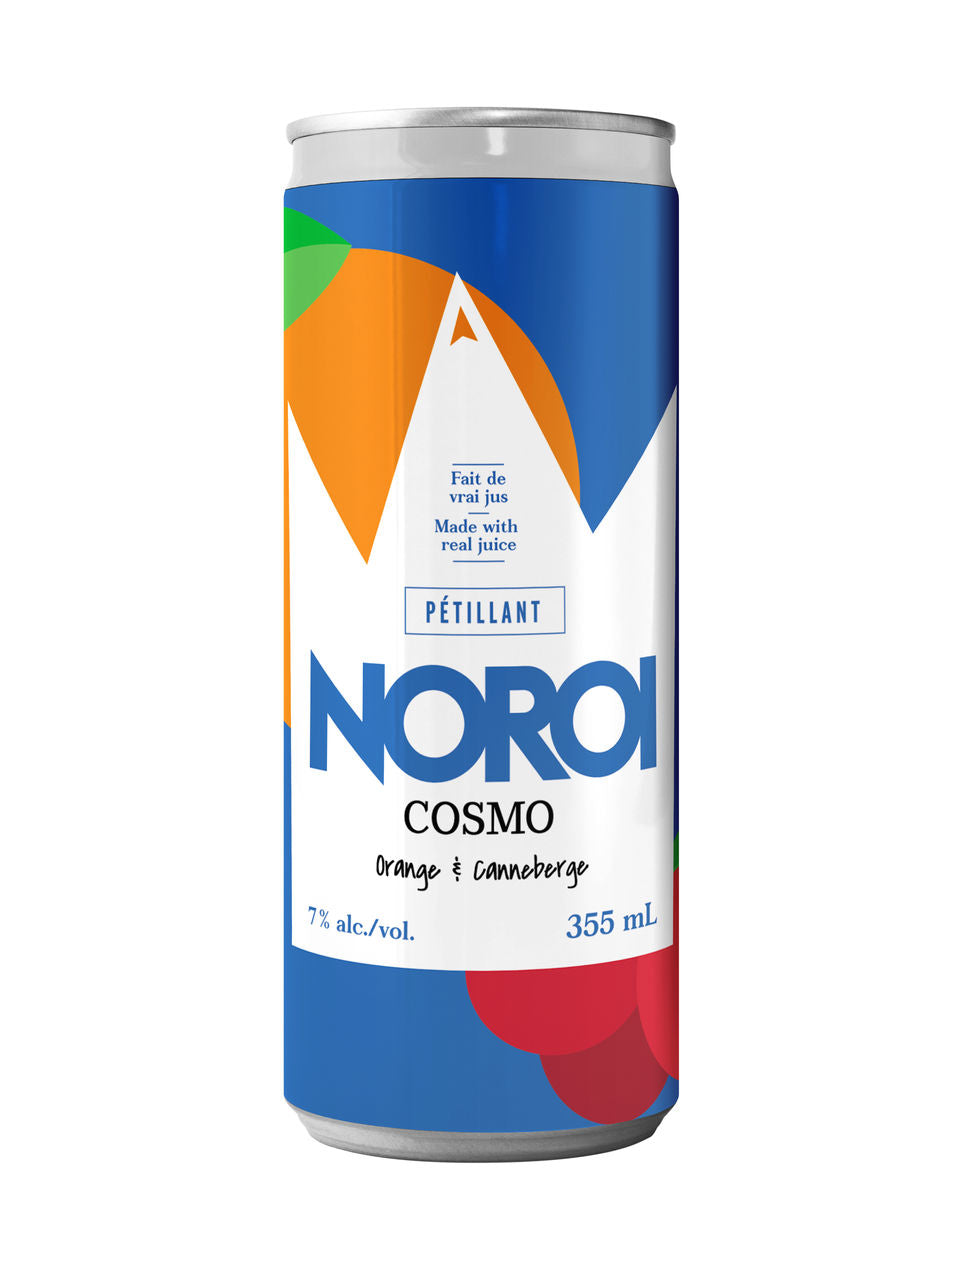 NOROI Sparkling Cosmo Orange and Cranberry 355 ml can